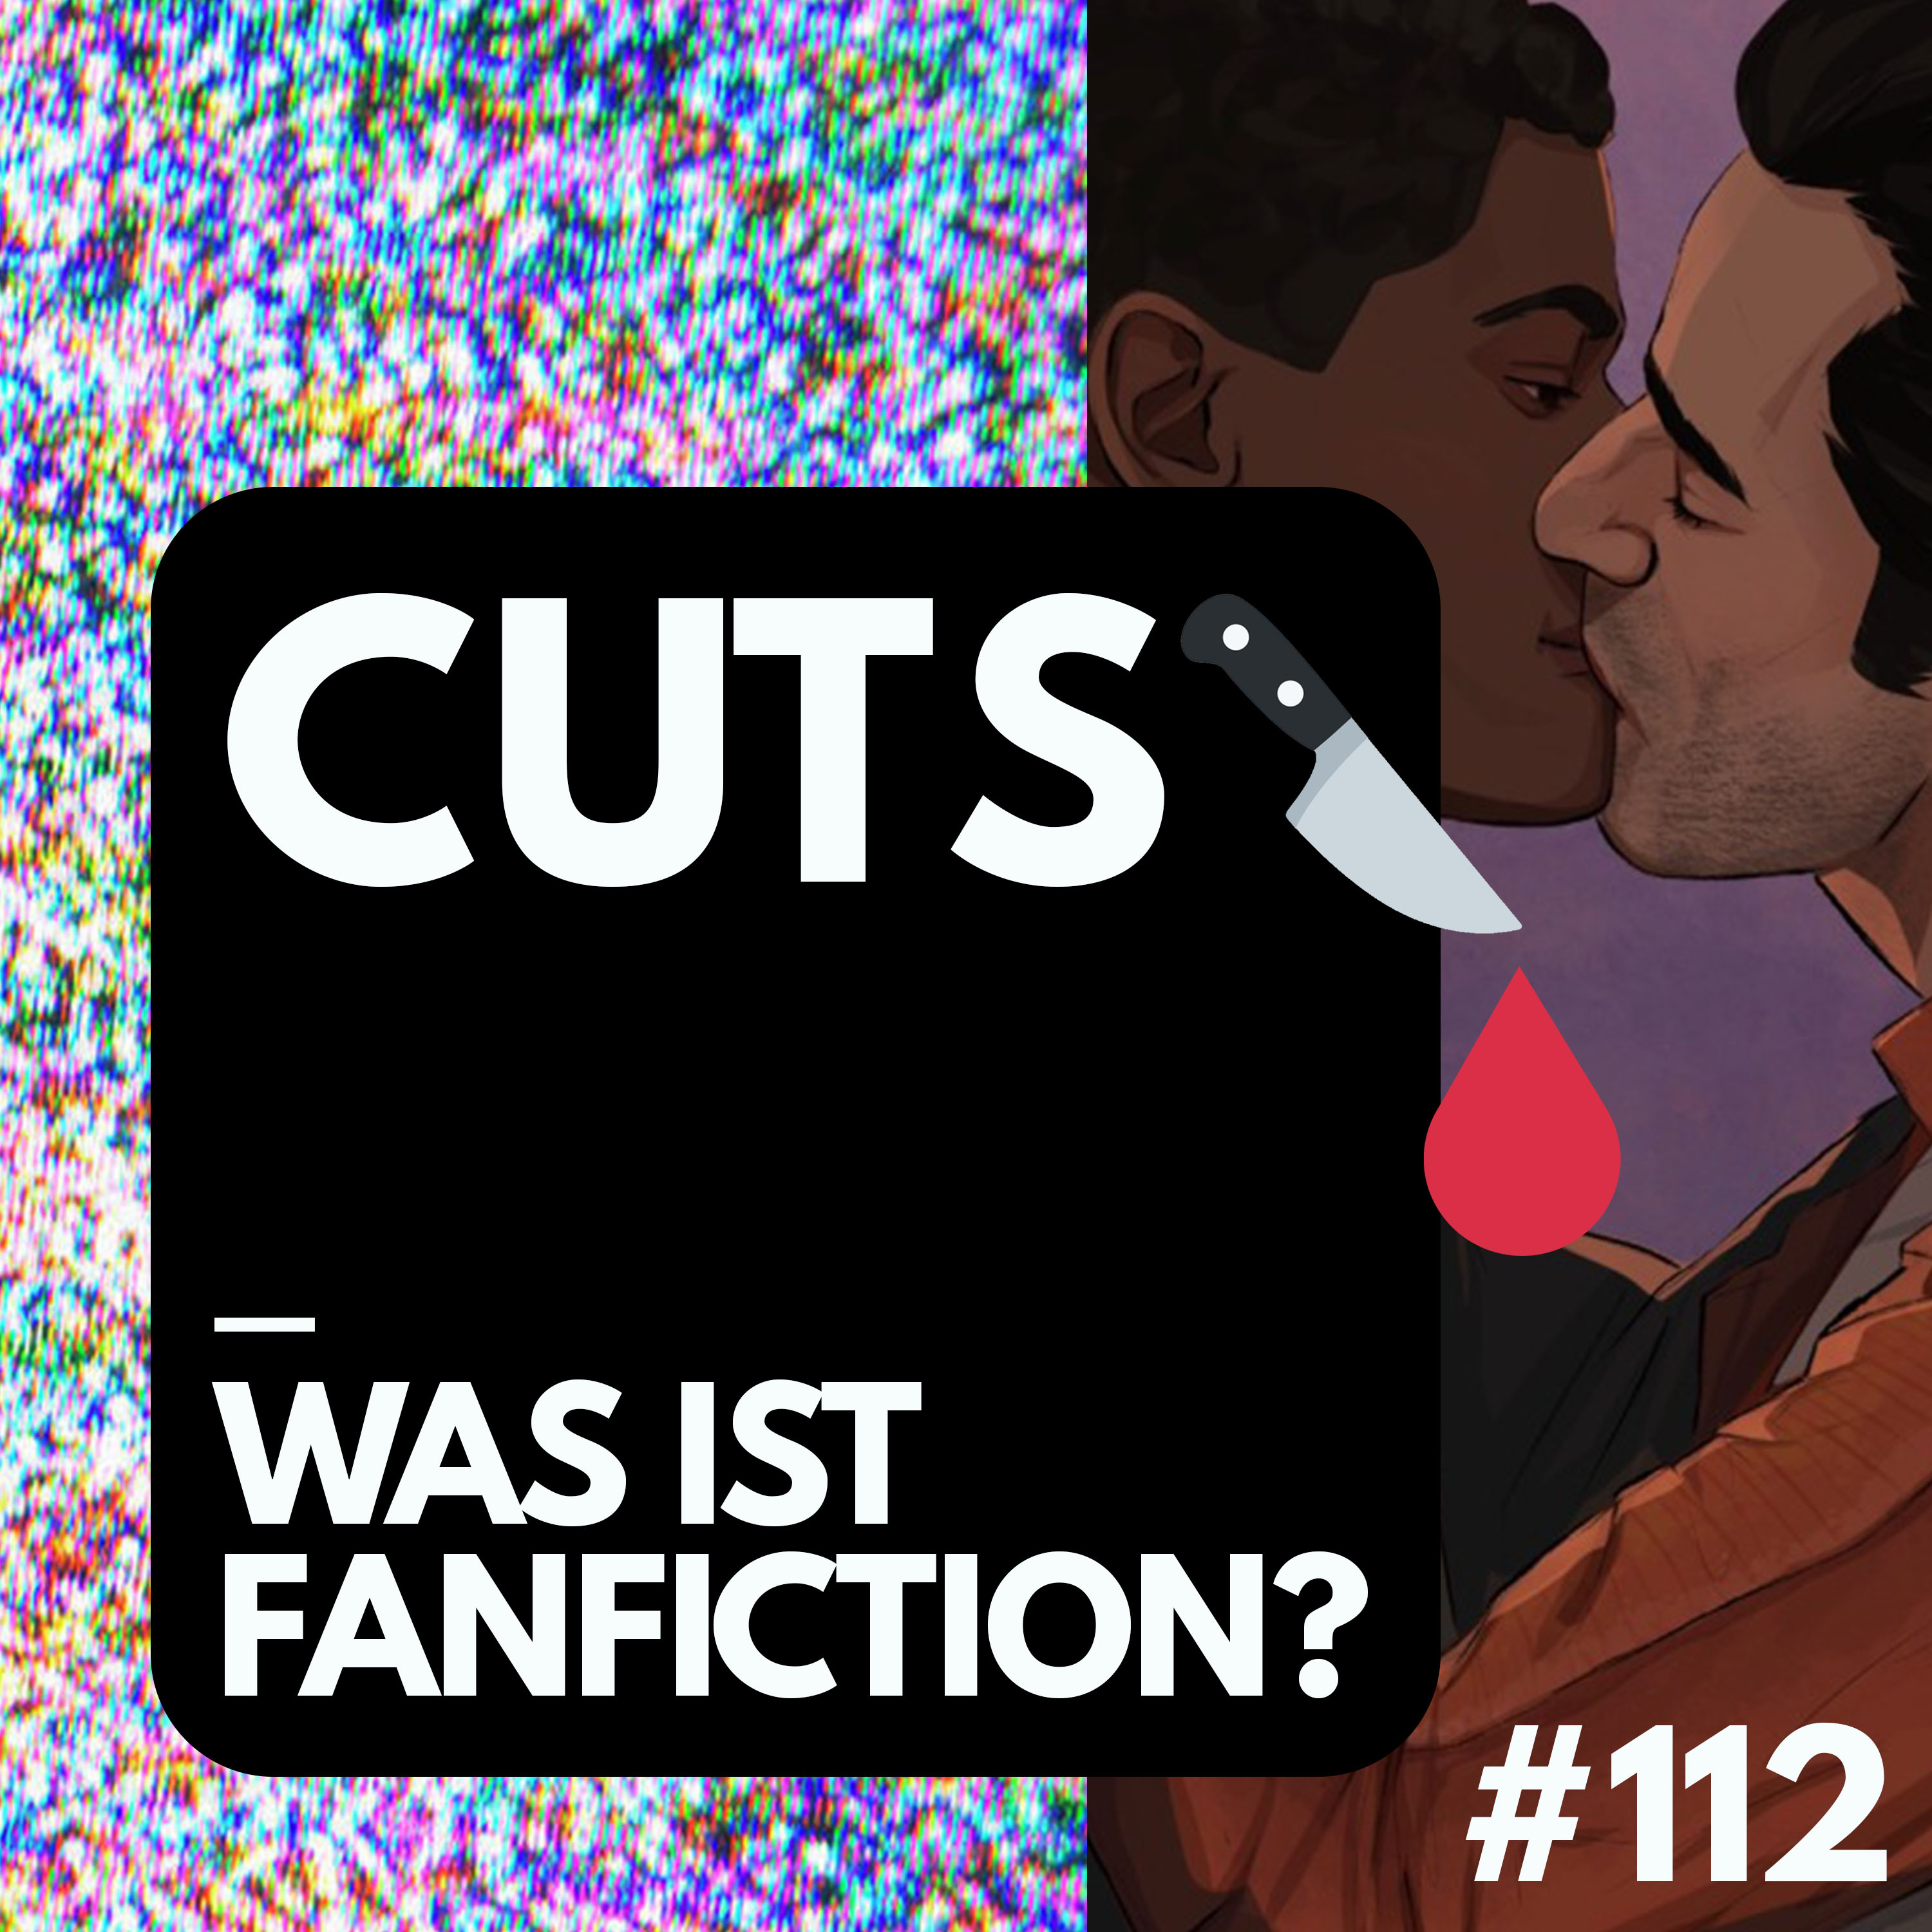 #112 - Was ist Fanfiction?